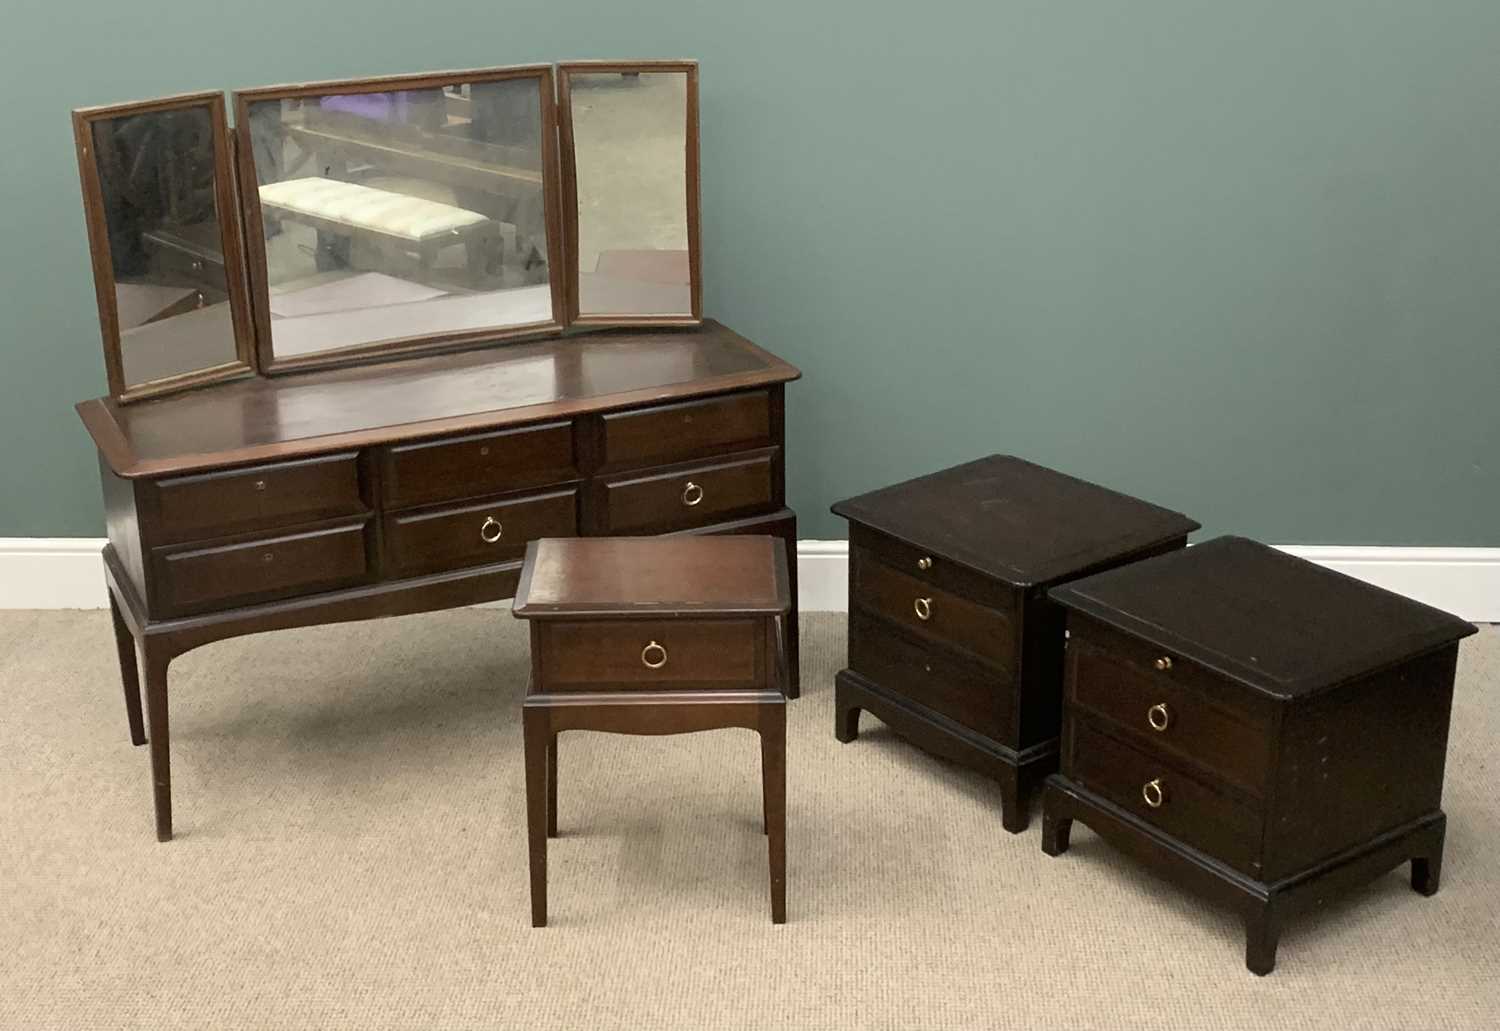 STAG MINSTREL BEDROOM FURNITURE comprising dressing table, 128 (h) x 131 (w) x 46 (d) cms, two small